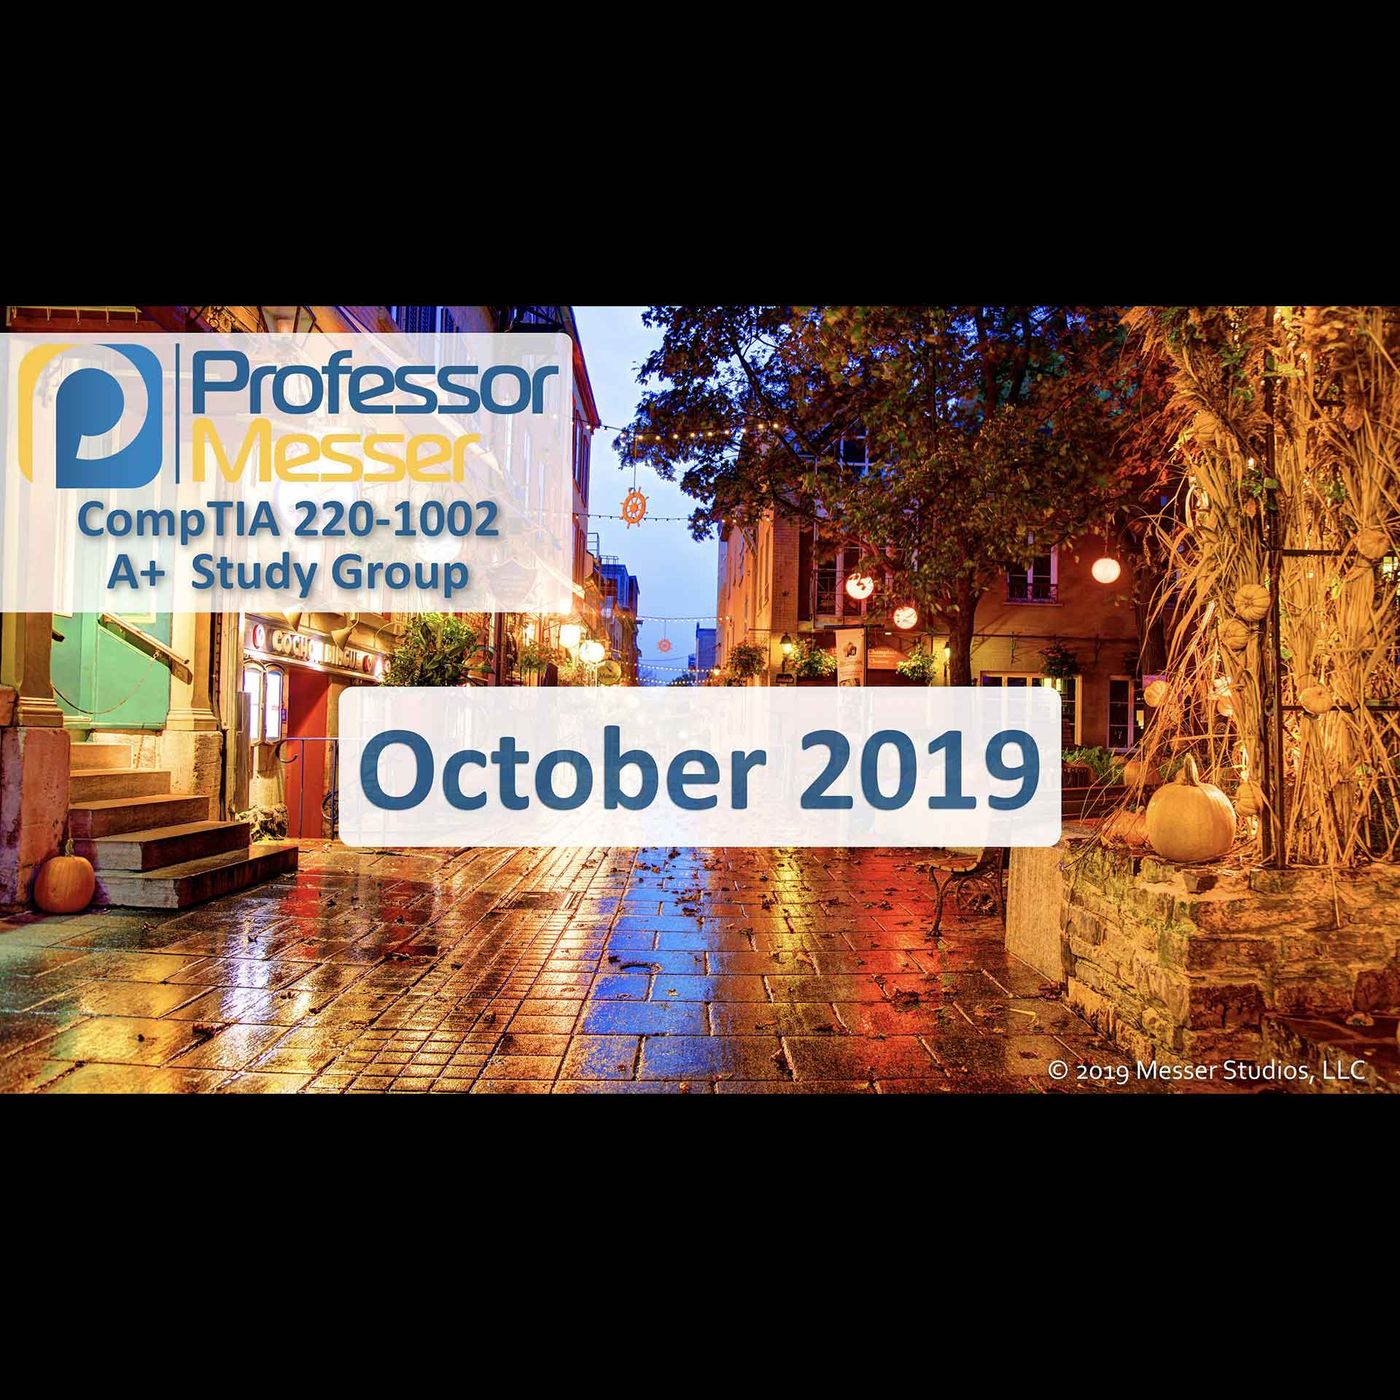 Professor Messer's CompTIA 220-1002 A+ Study Group After Show - October 2019